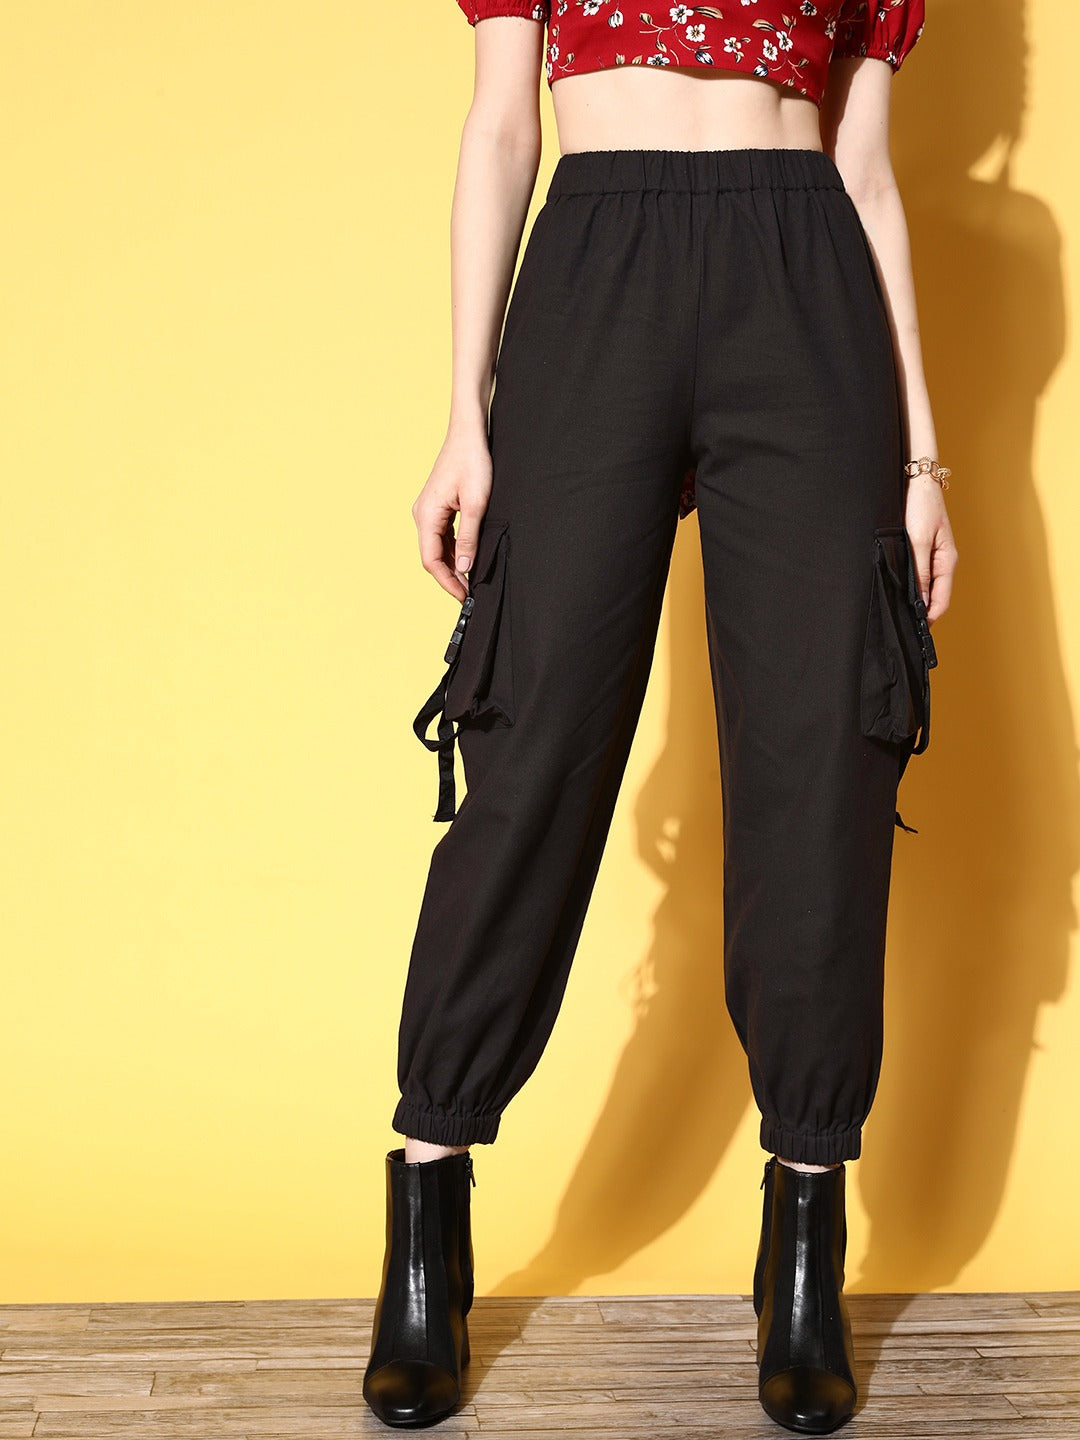 Trending Wholesale white cargo pants women At Affordable Prices